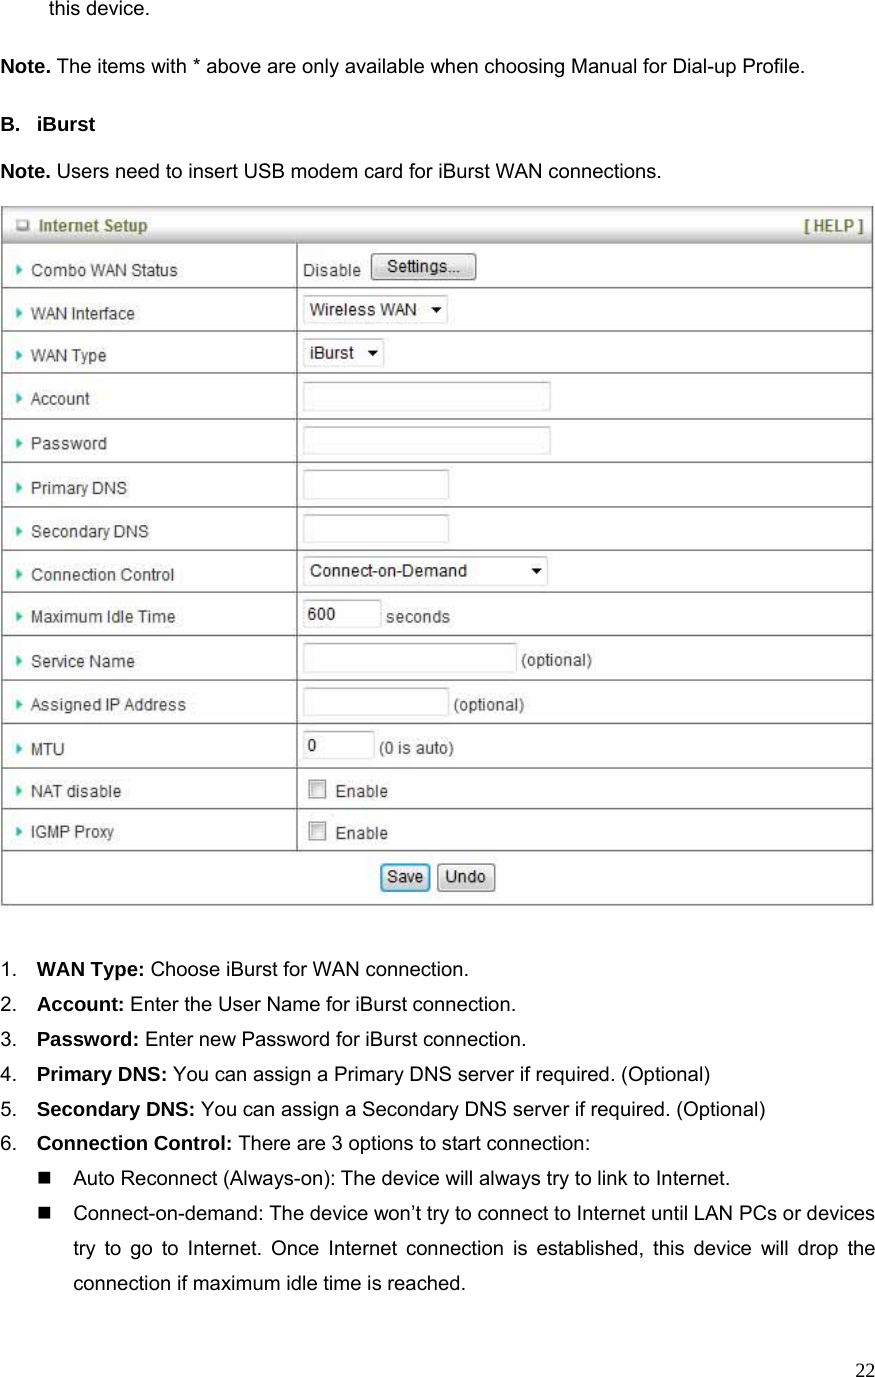  22this device.  Note. The items with * above are only available when choosing Manual for Dial-up Profile.    B. iBurst  Note. Users need to insert USB modem card for iBurst WAN connections.     1.  WAN Type: Choose iBurst for WAN connection. 2.  Account: Enter the User Name for iBurst connection. 3.  Password: Enter new Password for iBurst connection. 4.  Primary DNS: You can assign a Primary DNS server if required. (Optional) 5.  Secondary DNS: You can assign a Secondary DNS server if required. (Optional) 6.  Connection Control: There are 3 options to start connection:     Auto Reconnect (Always-on): The device will always try to link to Internet.       Connect-on-demand: The device won’t try to connect to Internet until LAN PCs or devices try to go to Internet. Once Internet connection is established, this device will drop the connection if maximum idle time is reached. 